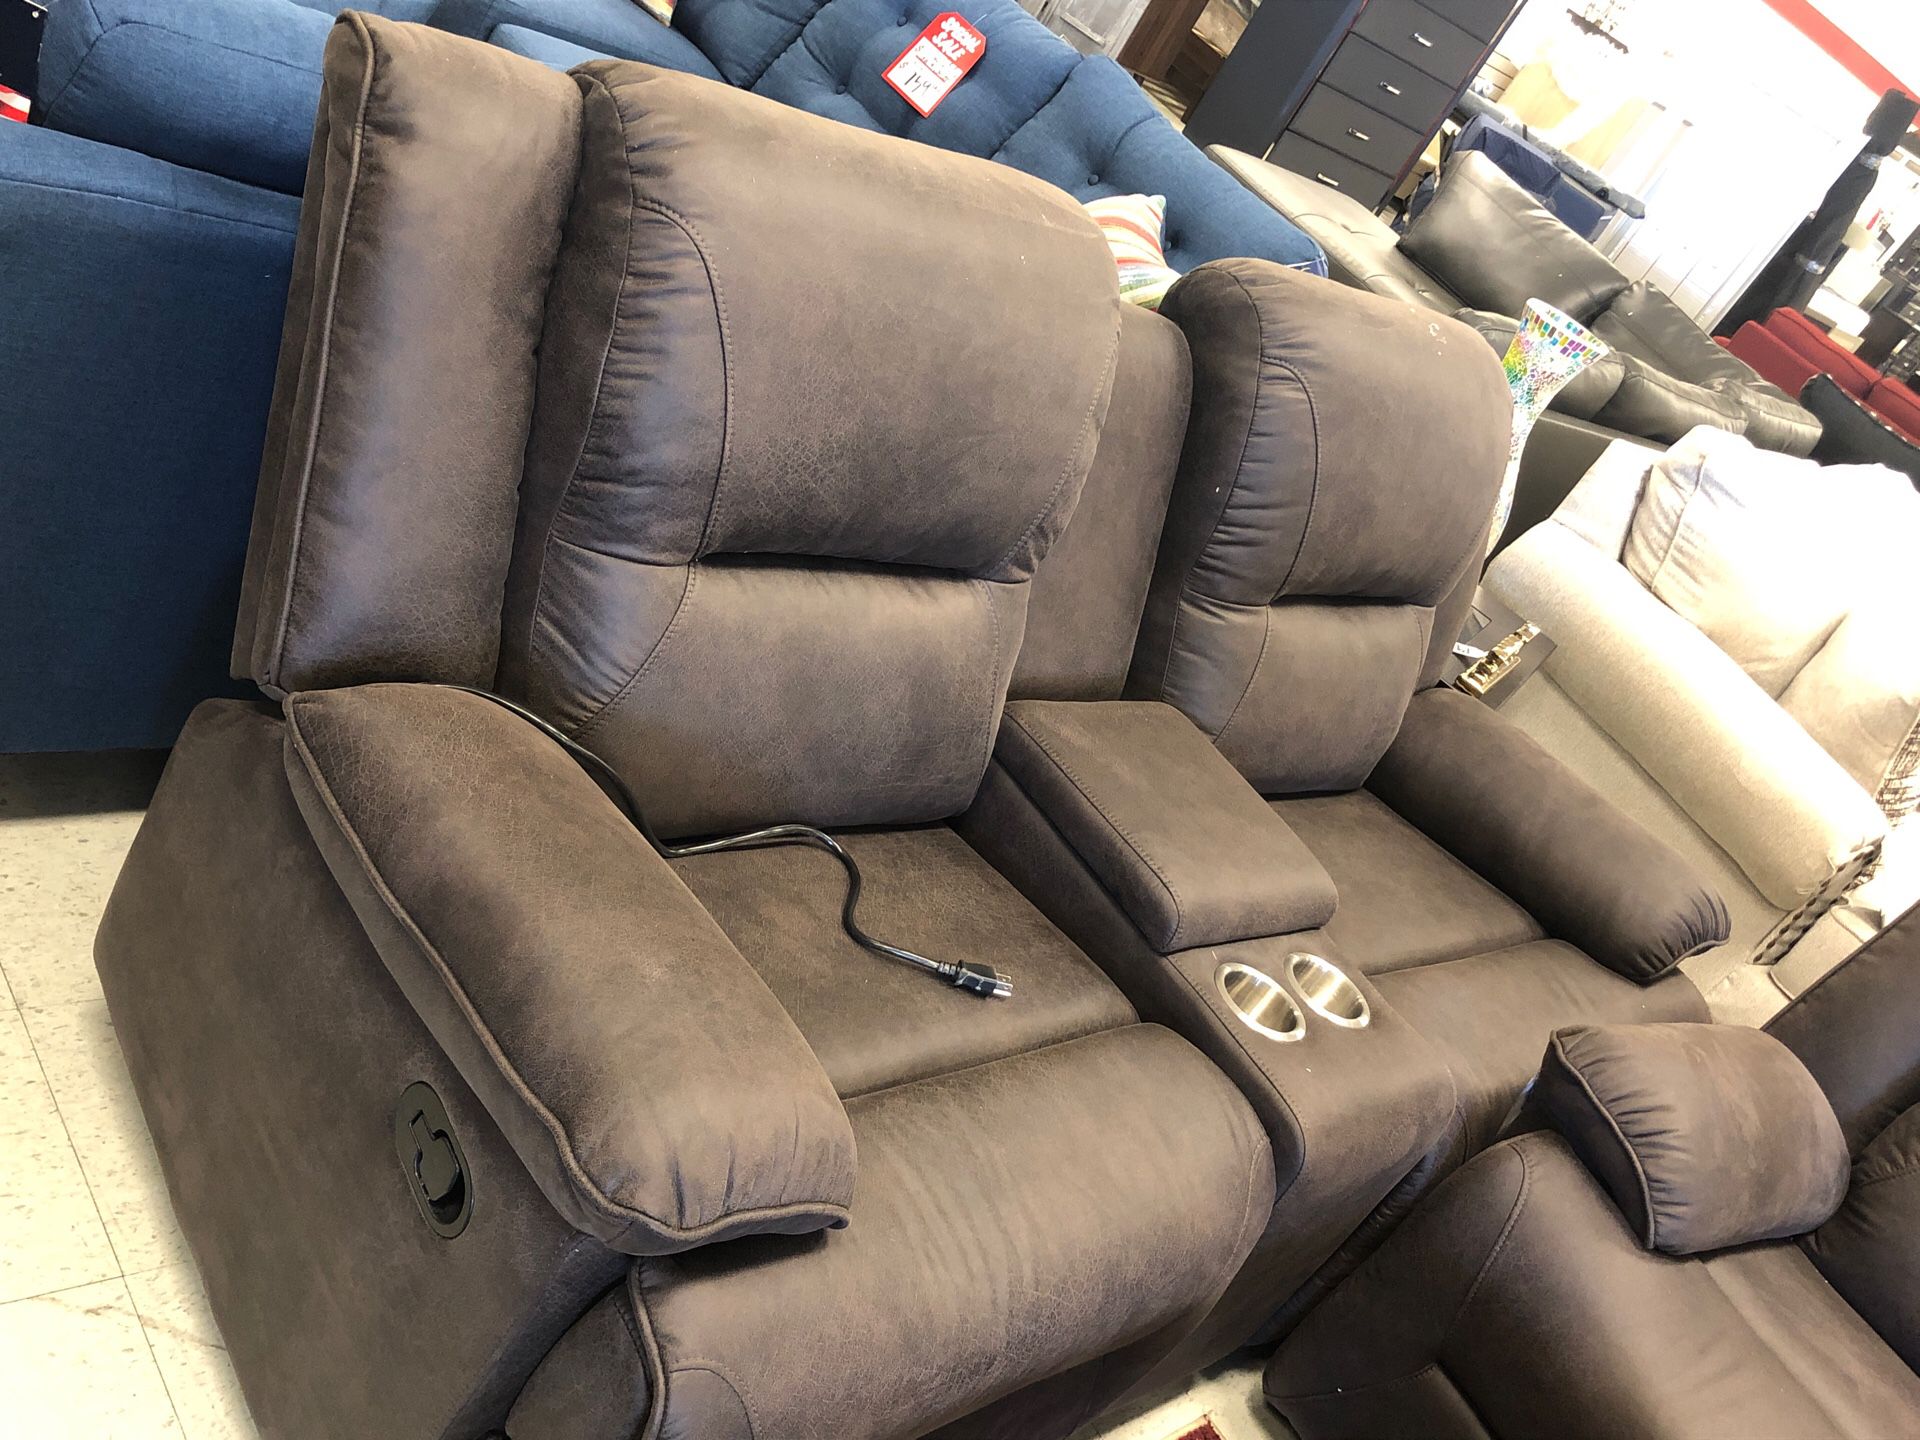 Huge blowout sale up to 80% off furniture market items on display in store only